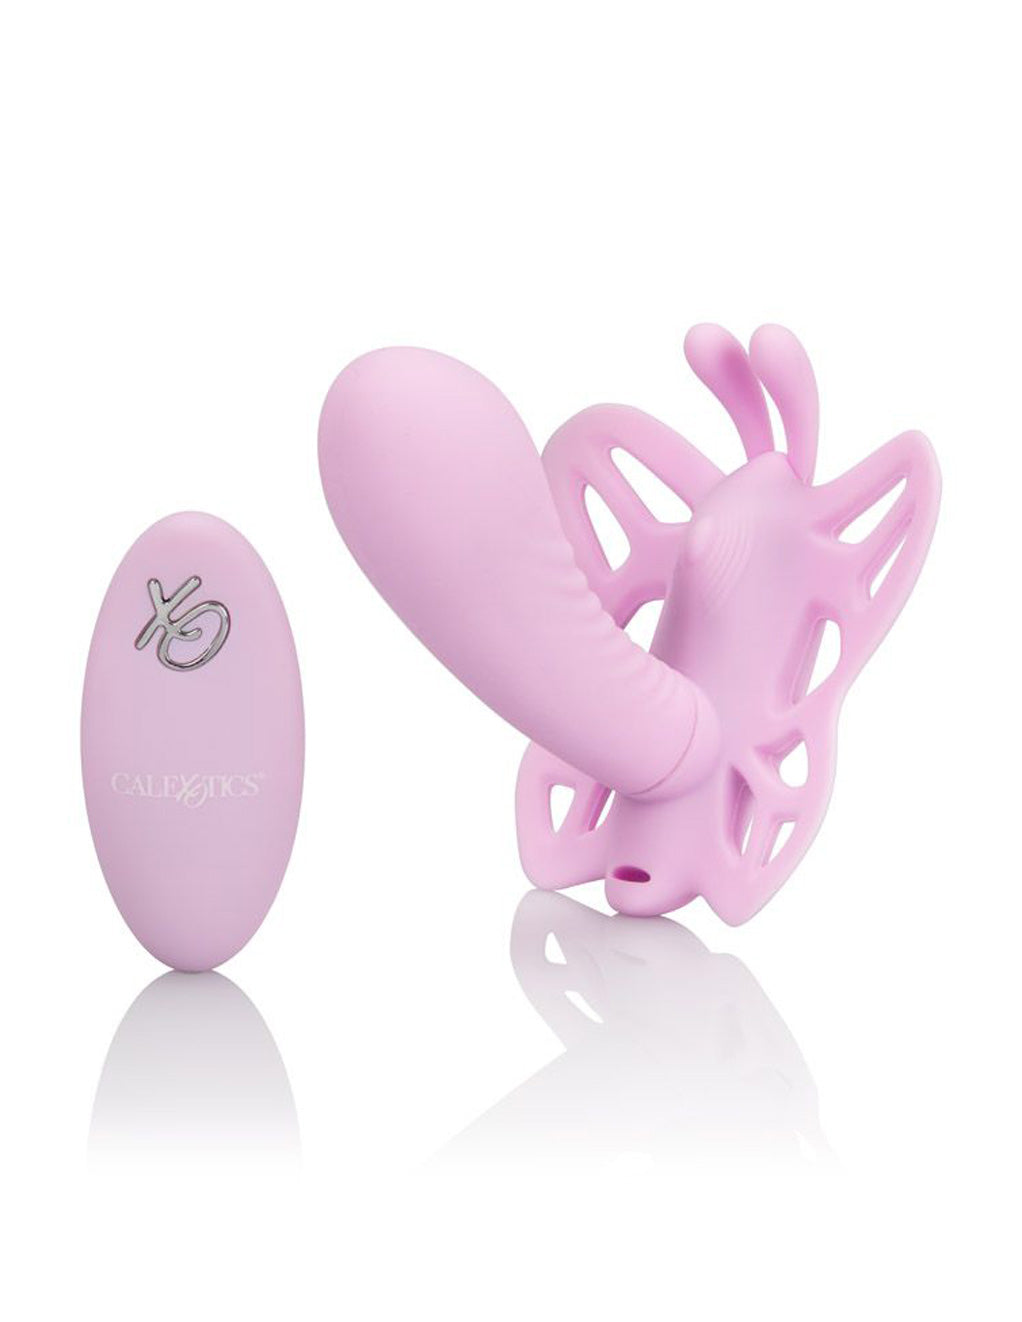 Cal Exotics Pink Venus Butterfly Remote Dual Stimulation MassagerCalExotics Venus Butterfly Venus G- Front with remote